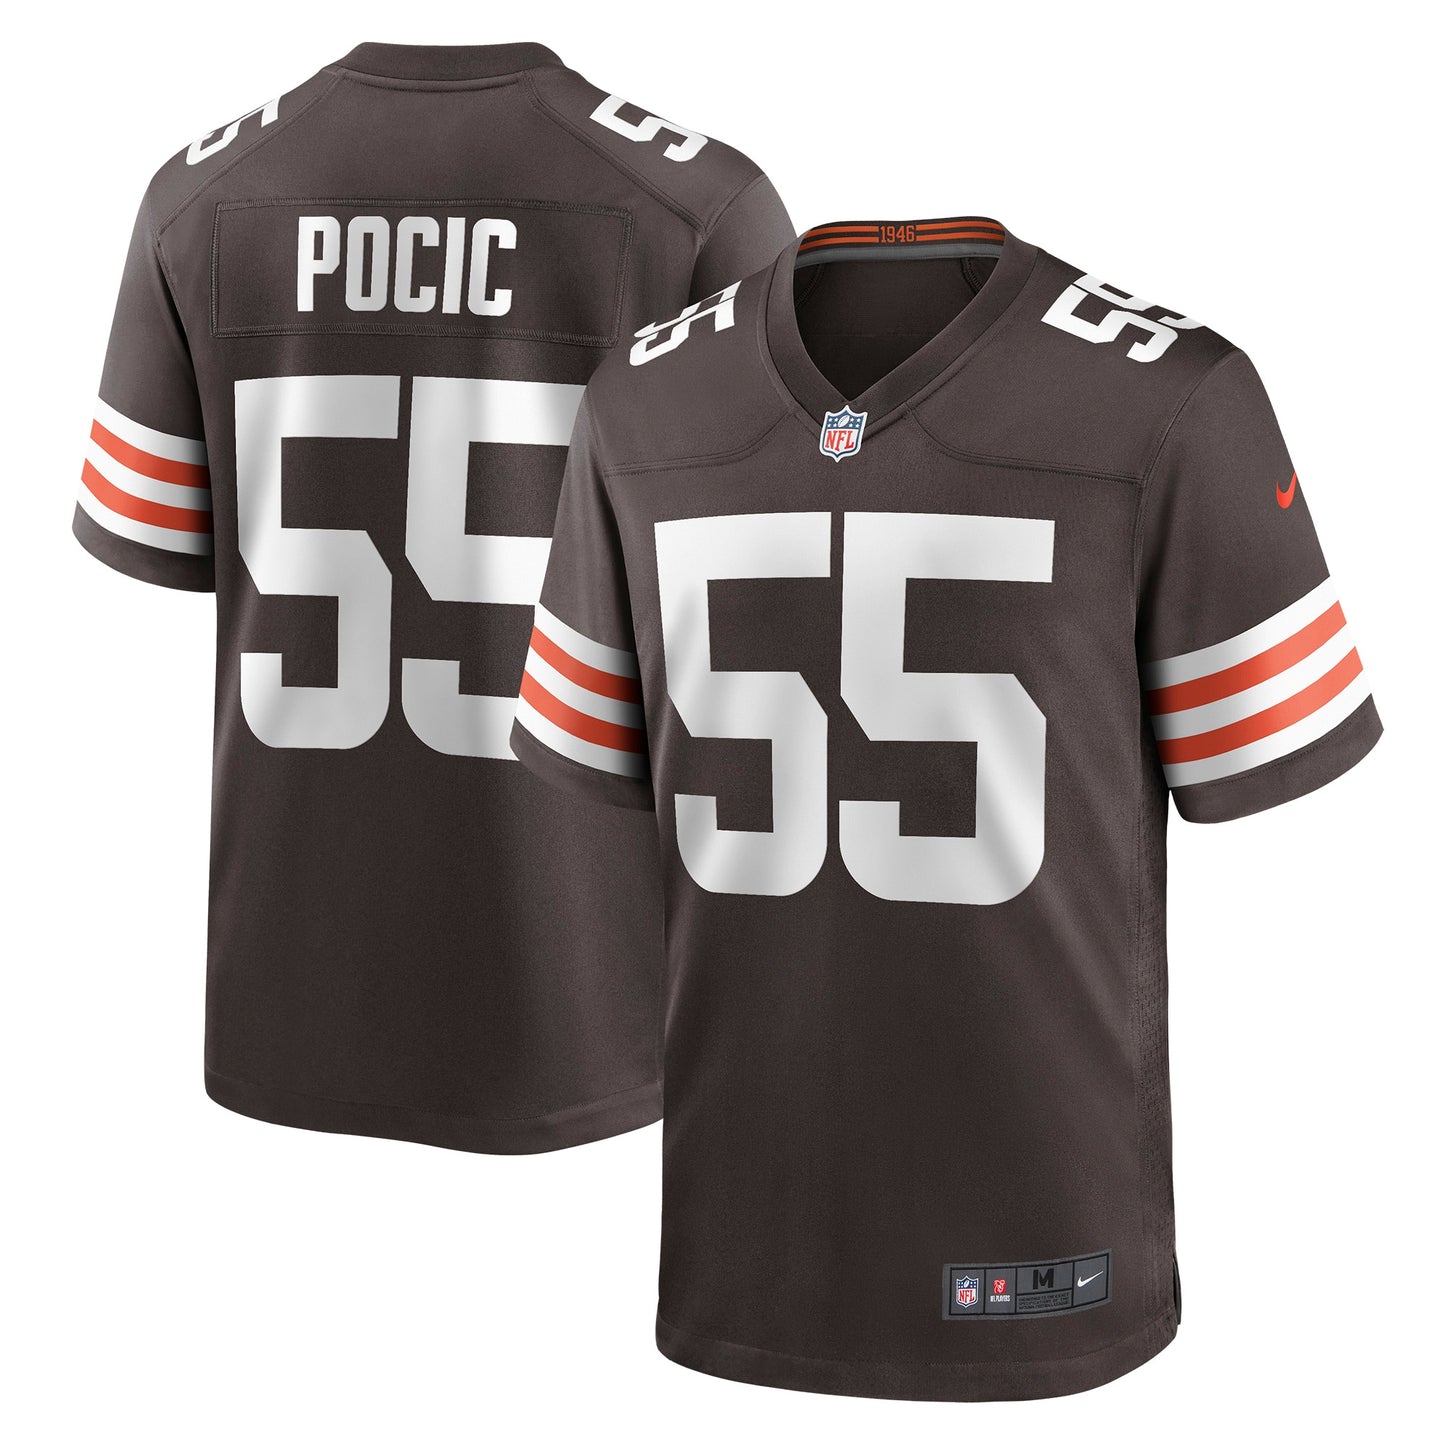 Ethan Pocic Cleveland Browns Nike Game Jersey - Brown